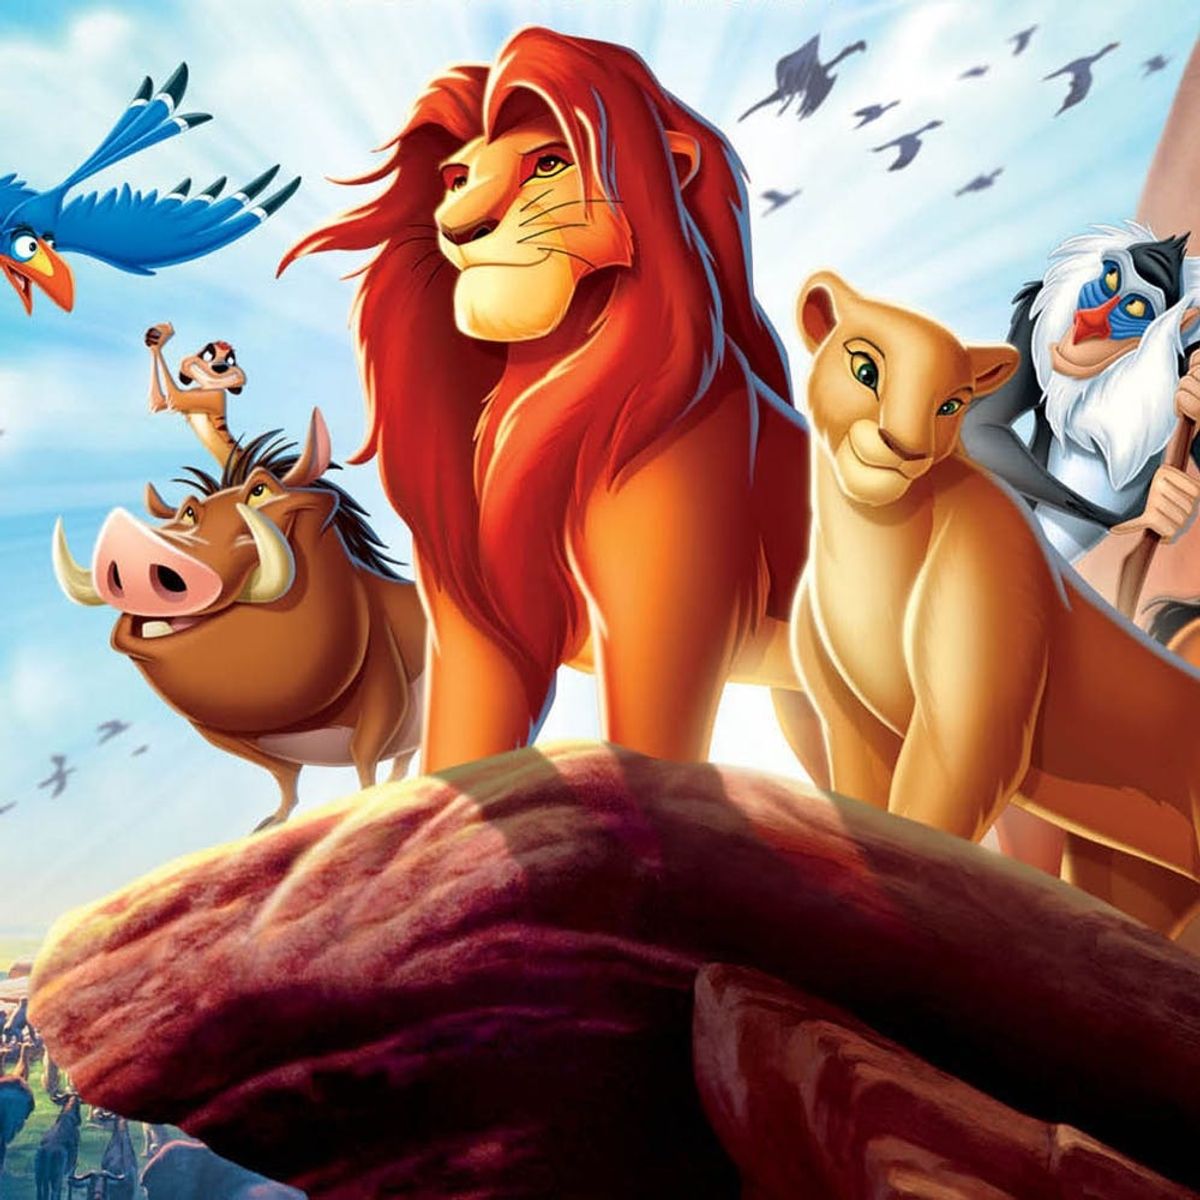 The Live-Action Lion King Release Is Coming WAY Later Than You Probably Thought